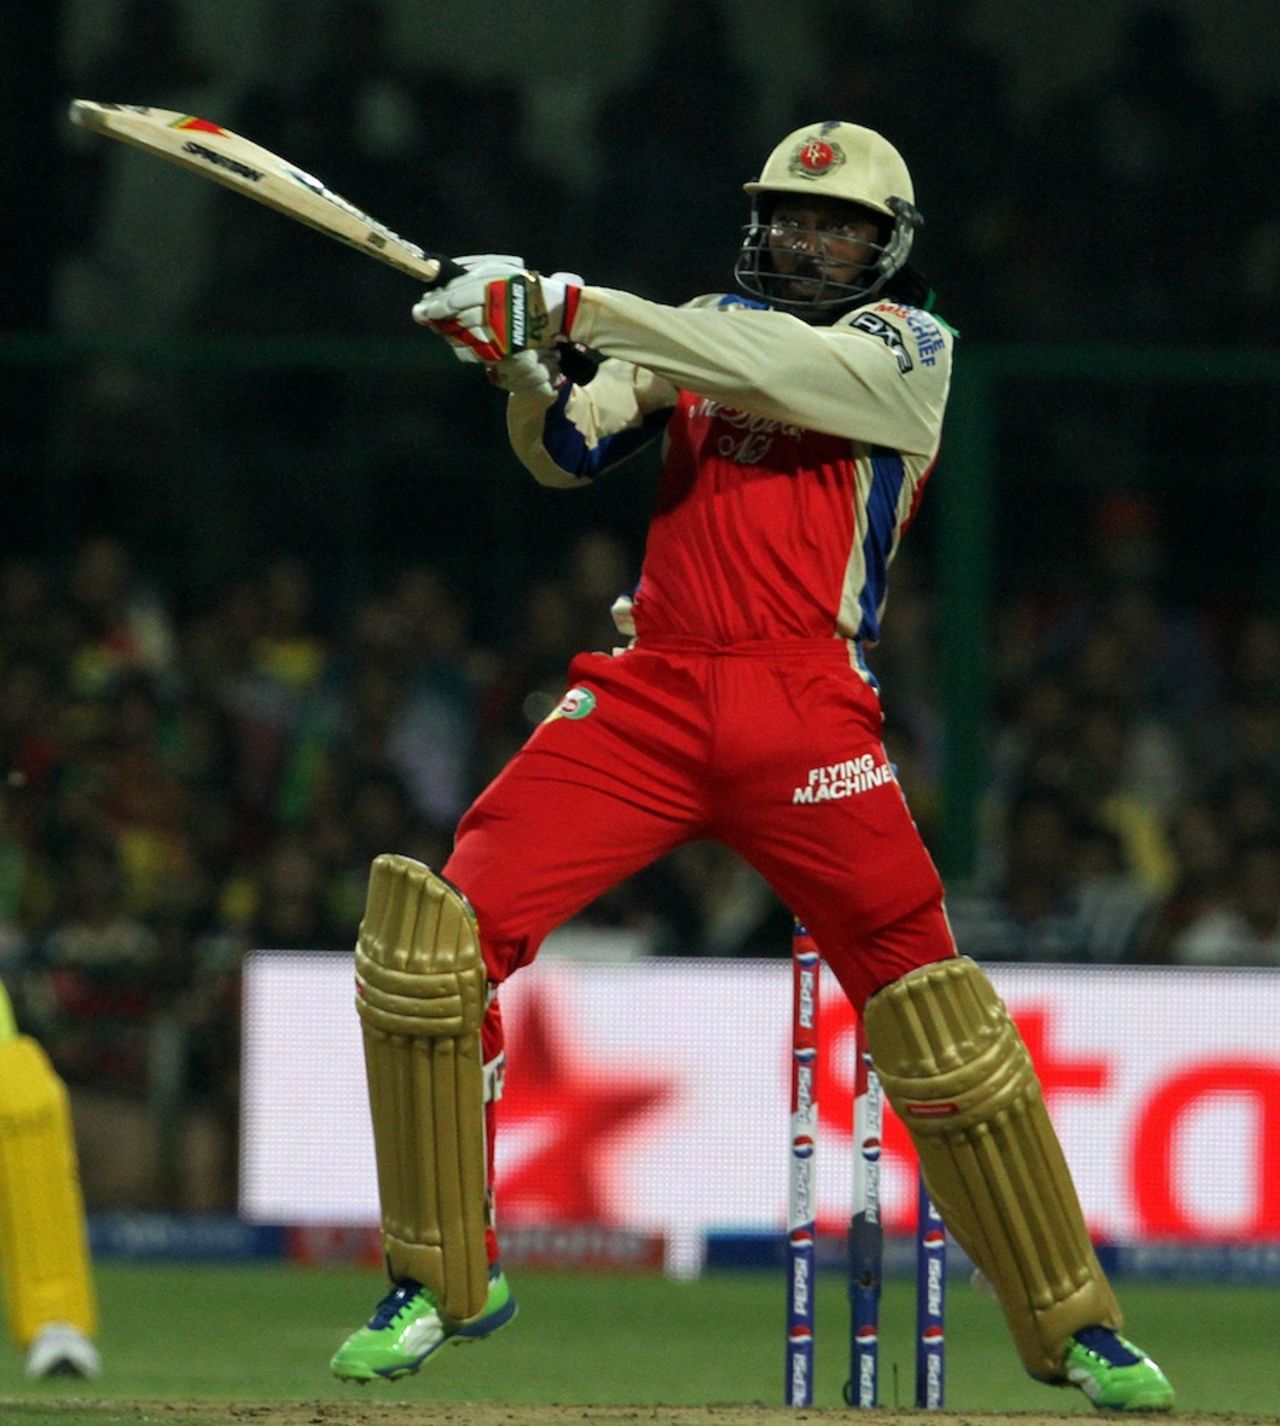 Chris Gayle powers one into the stands, Royal Challengers Bangalore v Chennai Super Kings, IPL2013, Bangalore, May 18, 2013